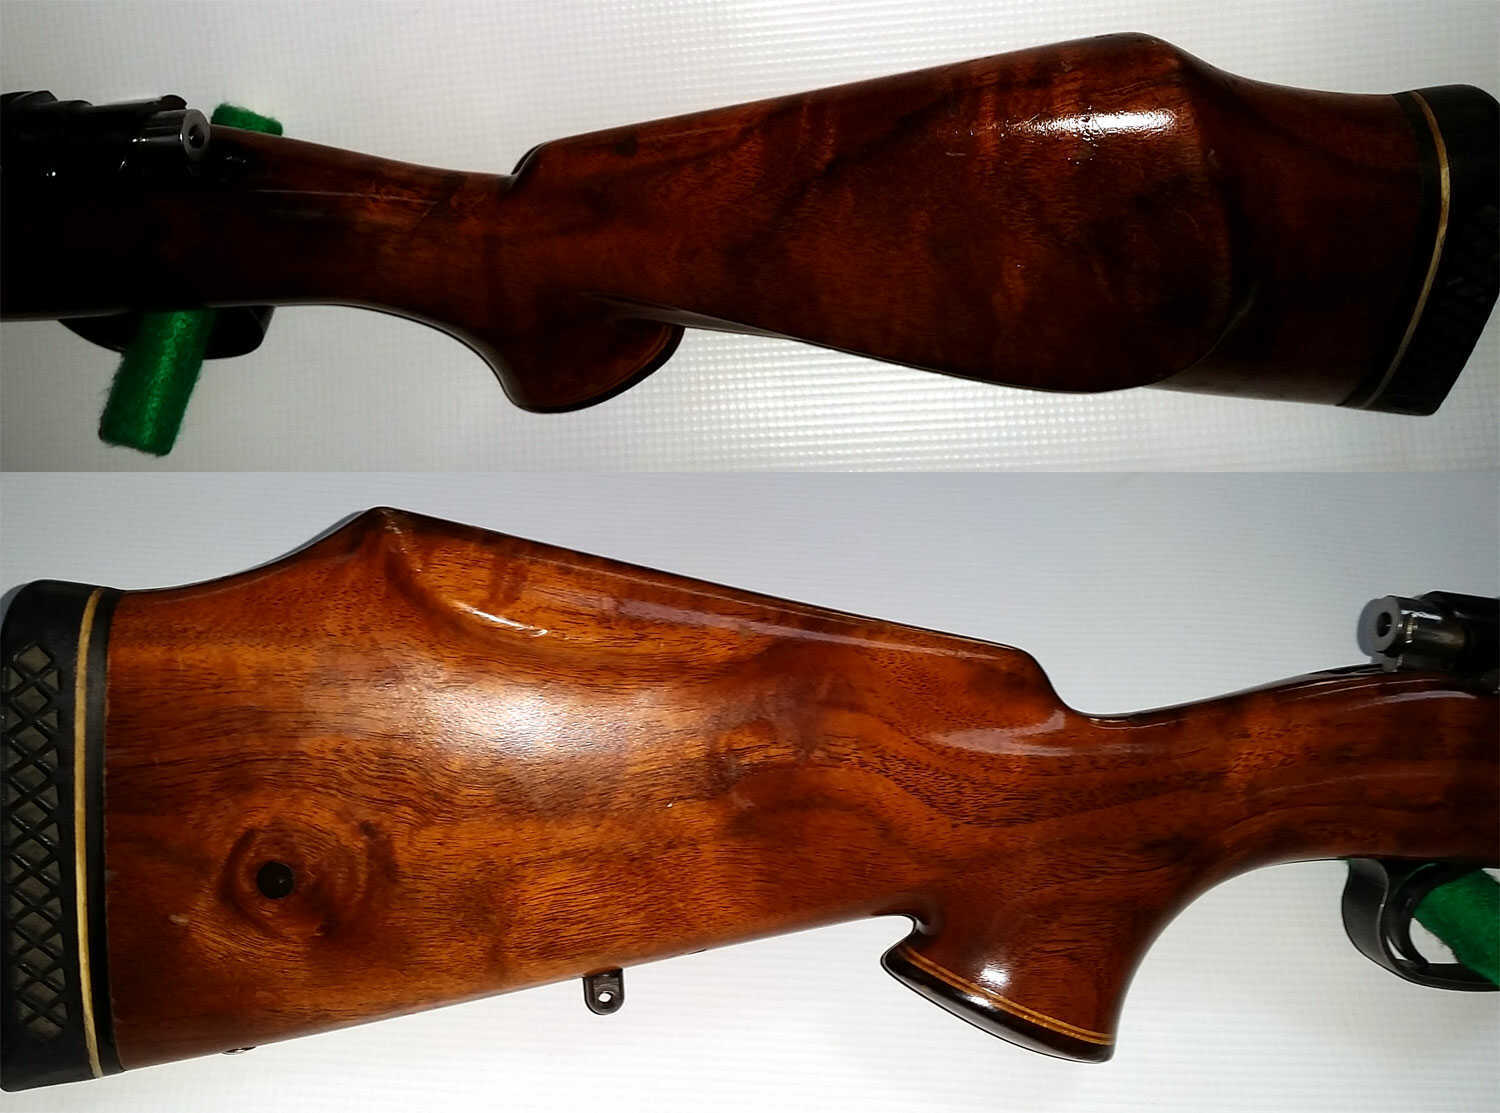 Used Custom Santa Barbara Mauser Action Rifle 270 Win With 20.5" Barrel Timney Adjustable Trigger Blued Finish And Wood Stock